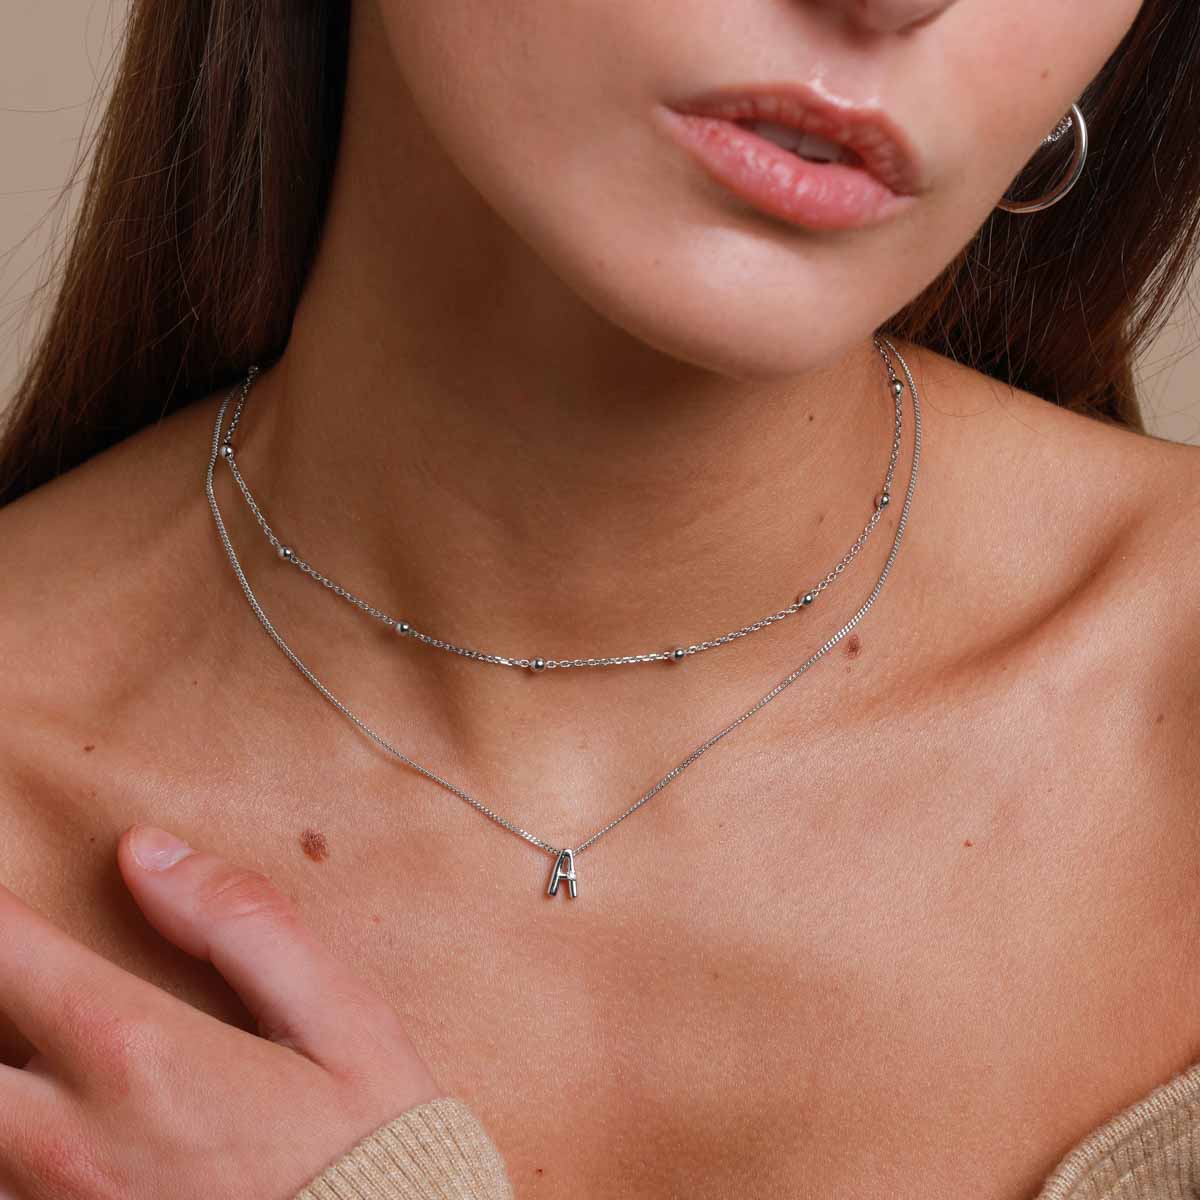 A Initial Pendant Necklace in Silver worn layered with beaded choker necklace